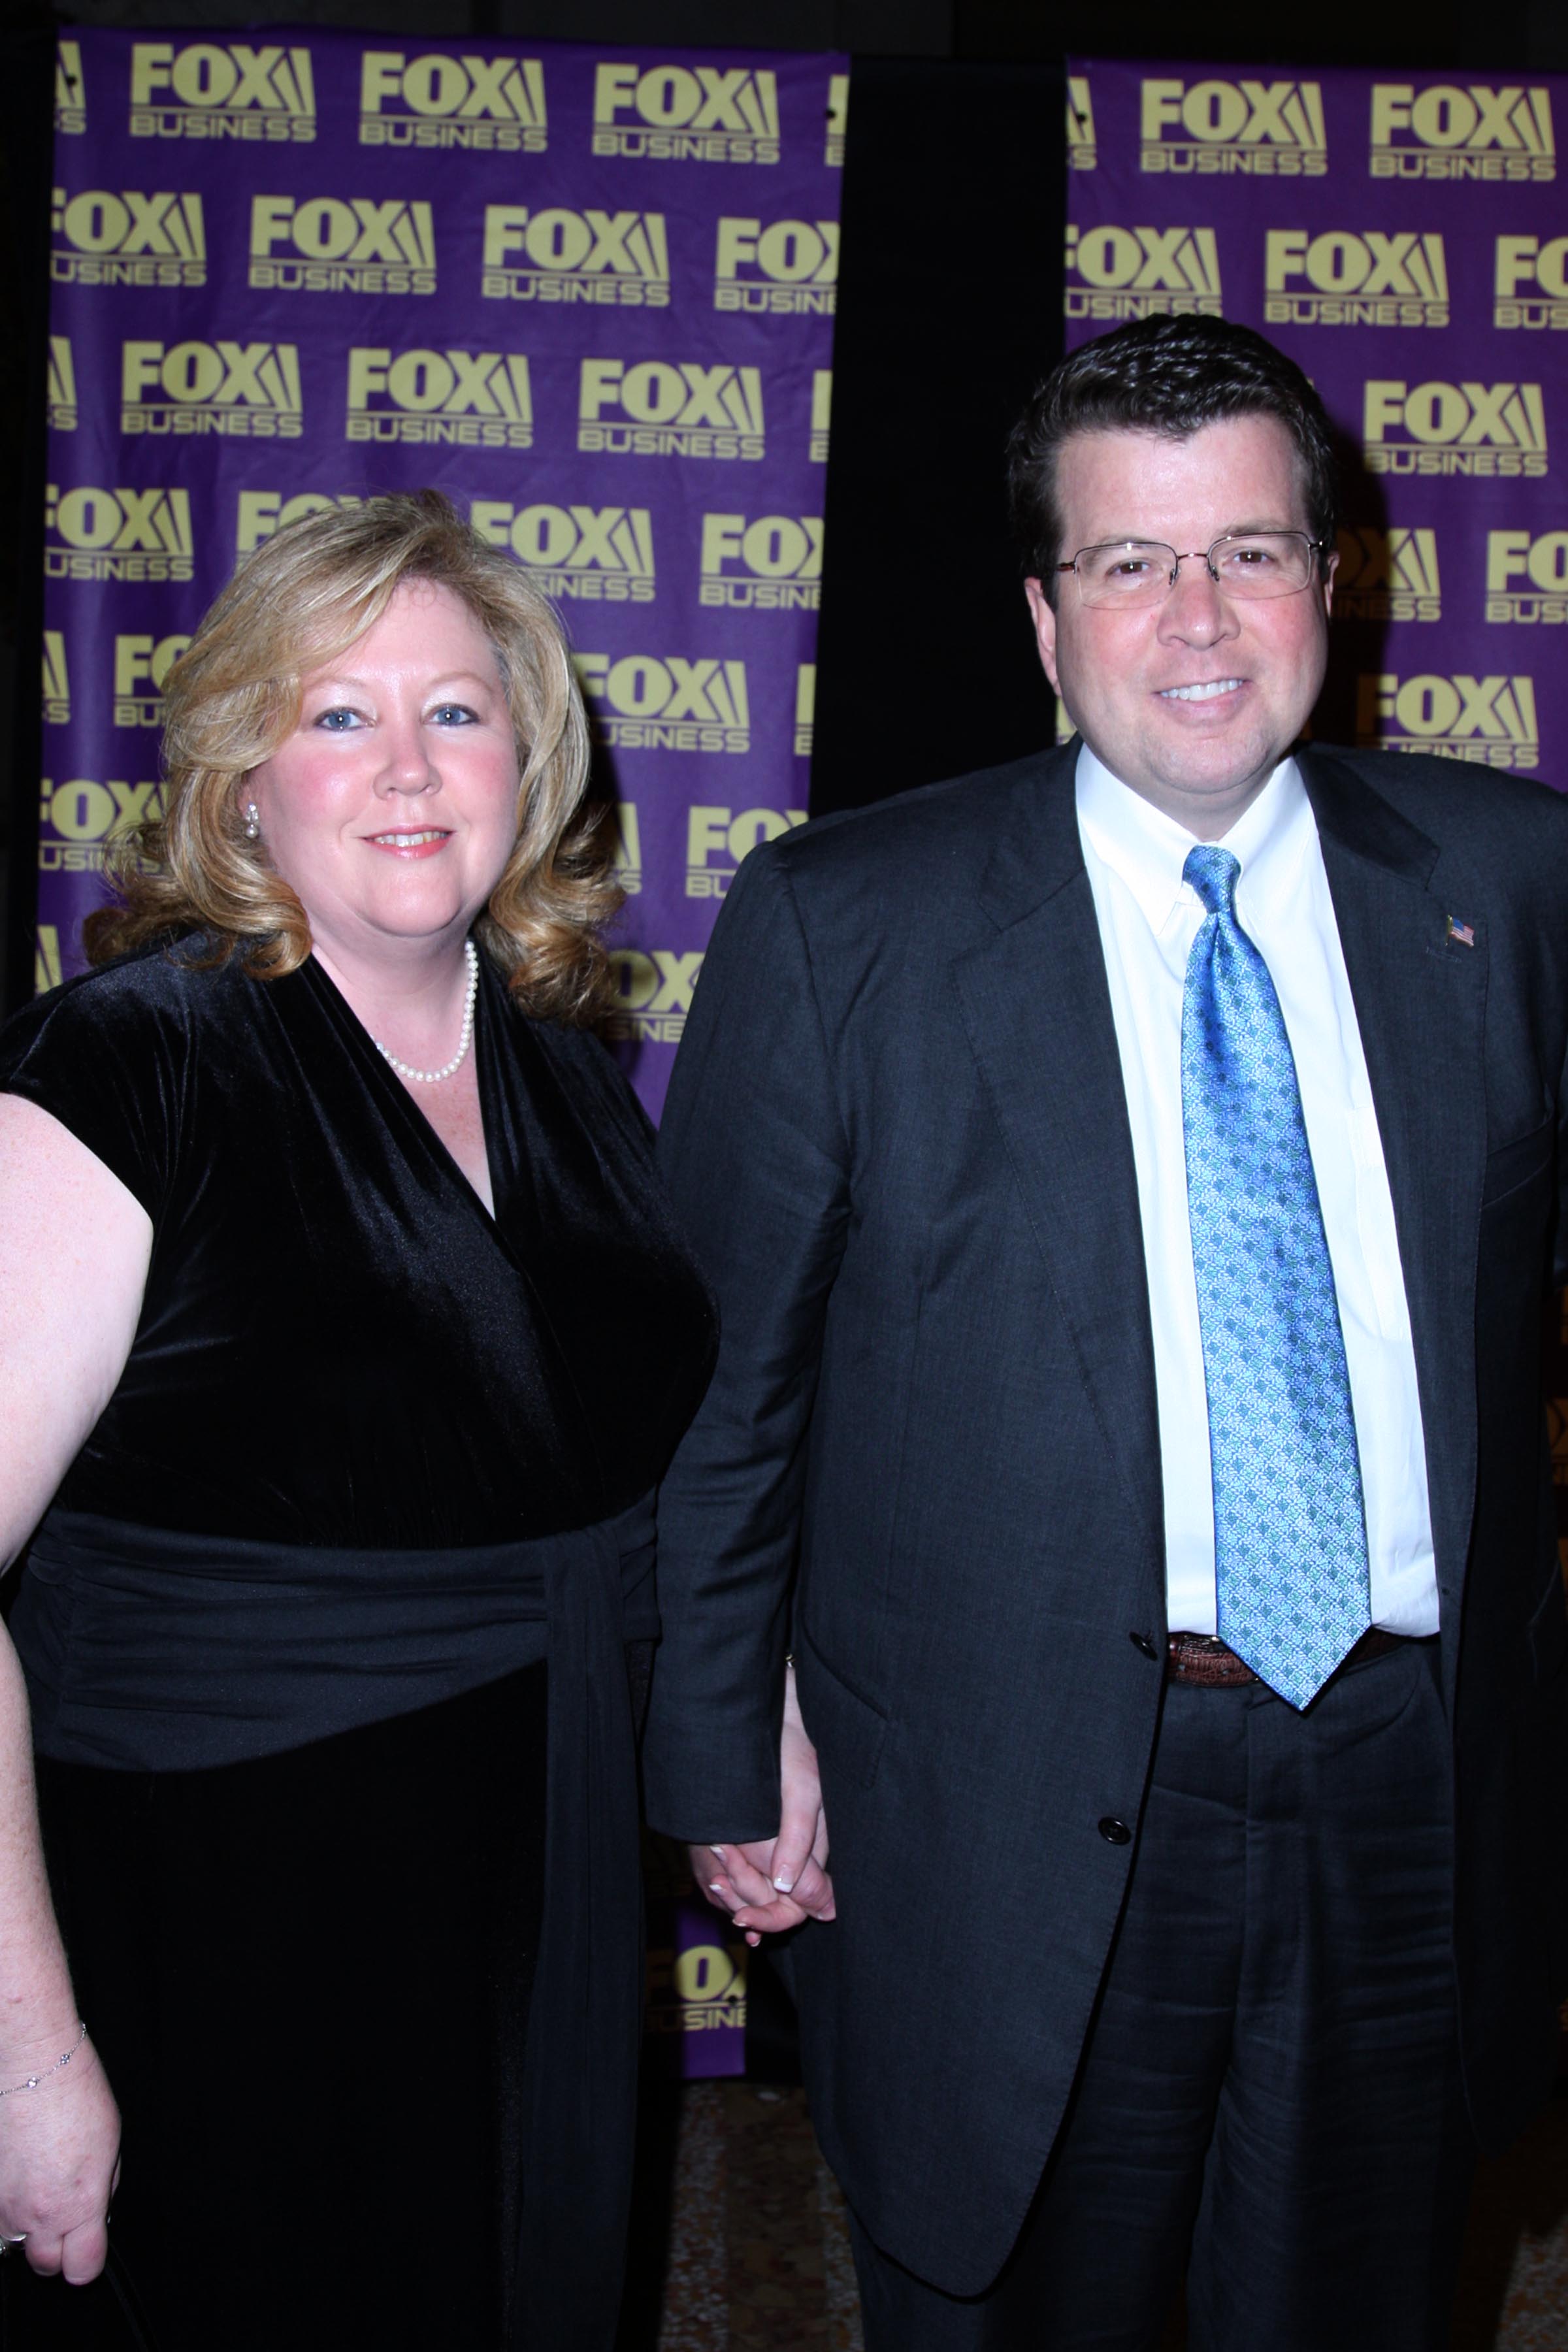 Mary Cavuto and Neil Cavuto attend A Celebration for the Launch of THE FOX BUSINESS NETWORK at Temple of Dendur on October 24, 2007 in New York City. | Source: Getty Images